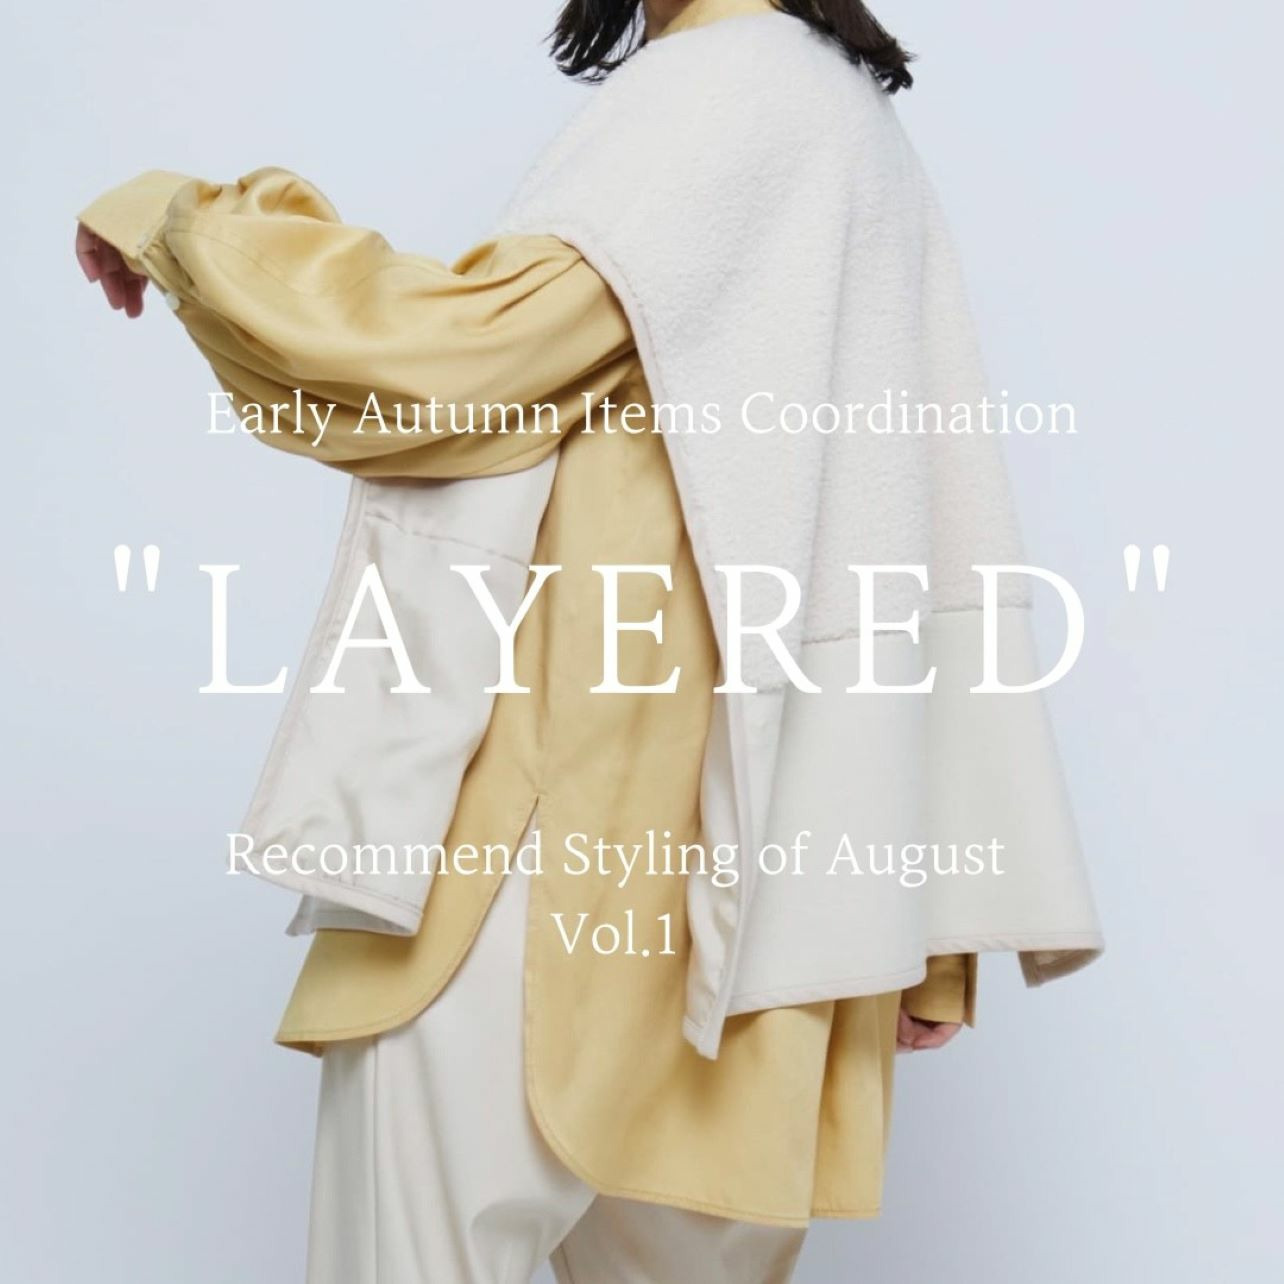 Recommend Styling of August Vol.1 "LAYERED"